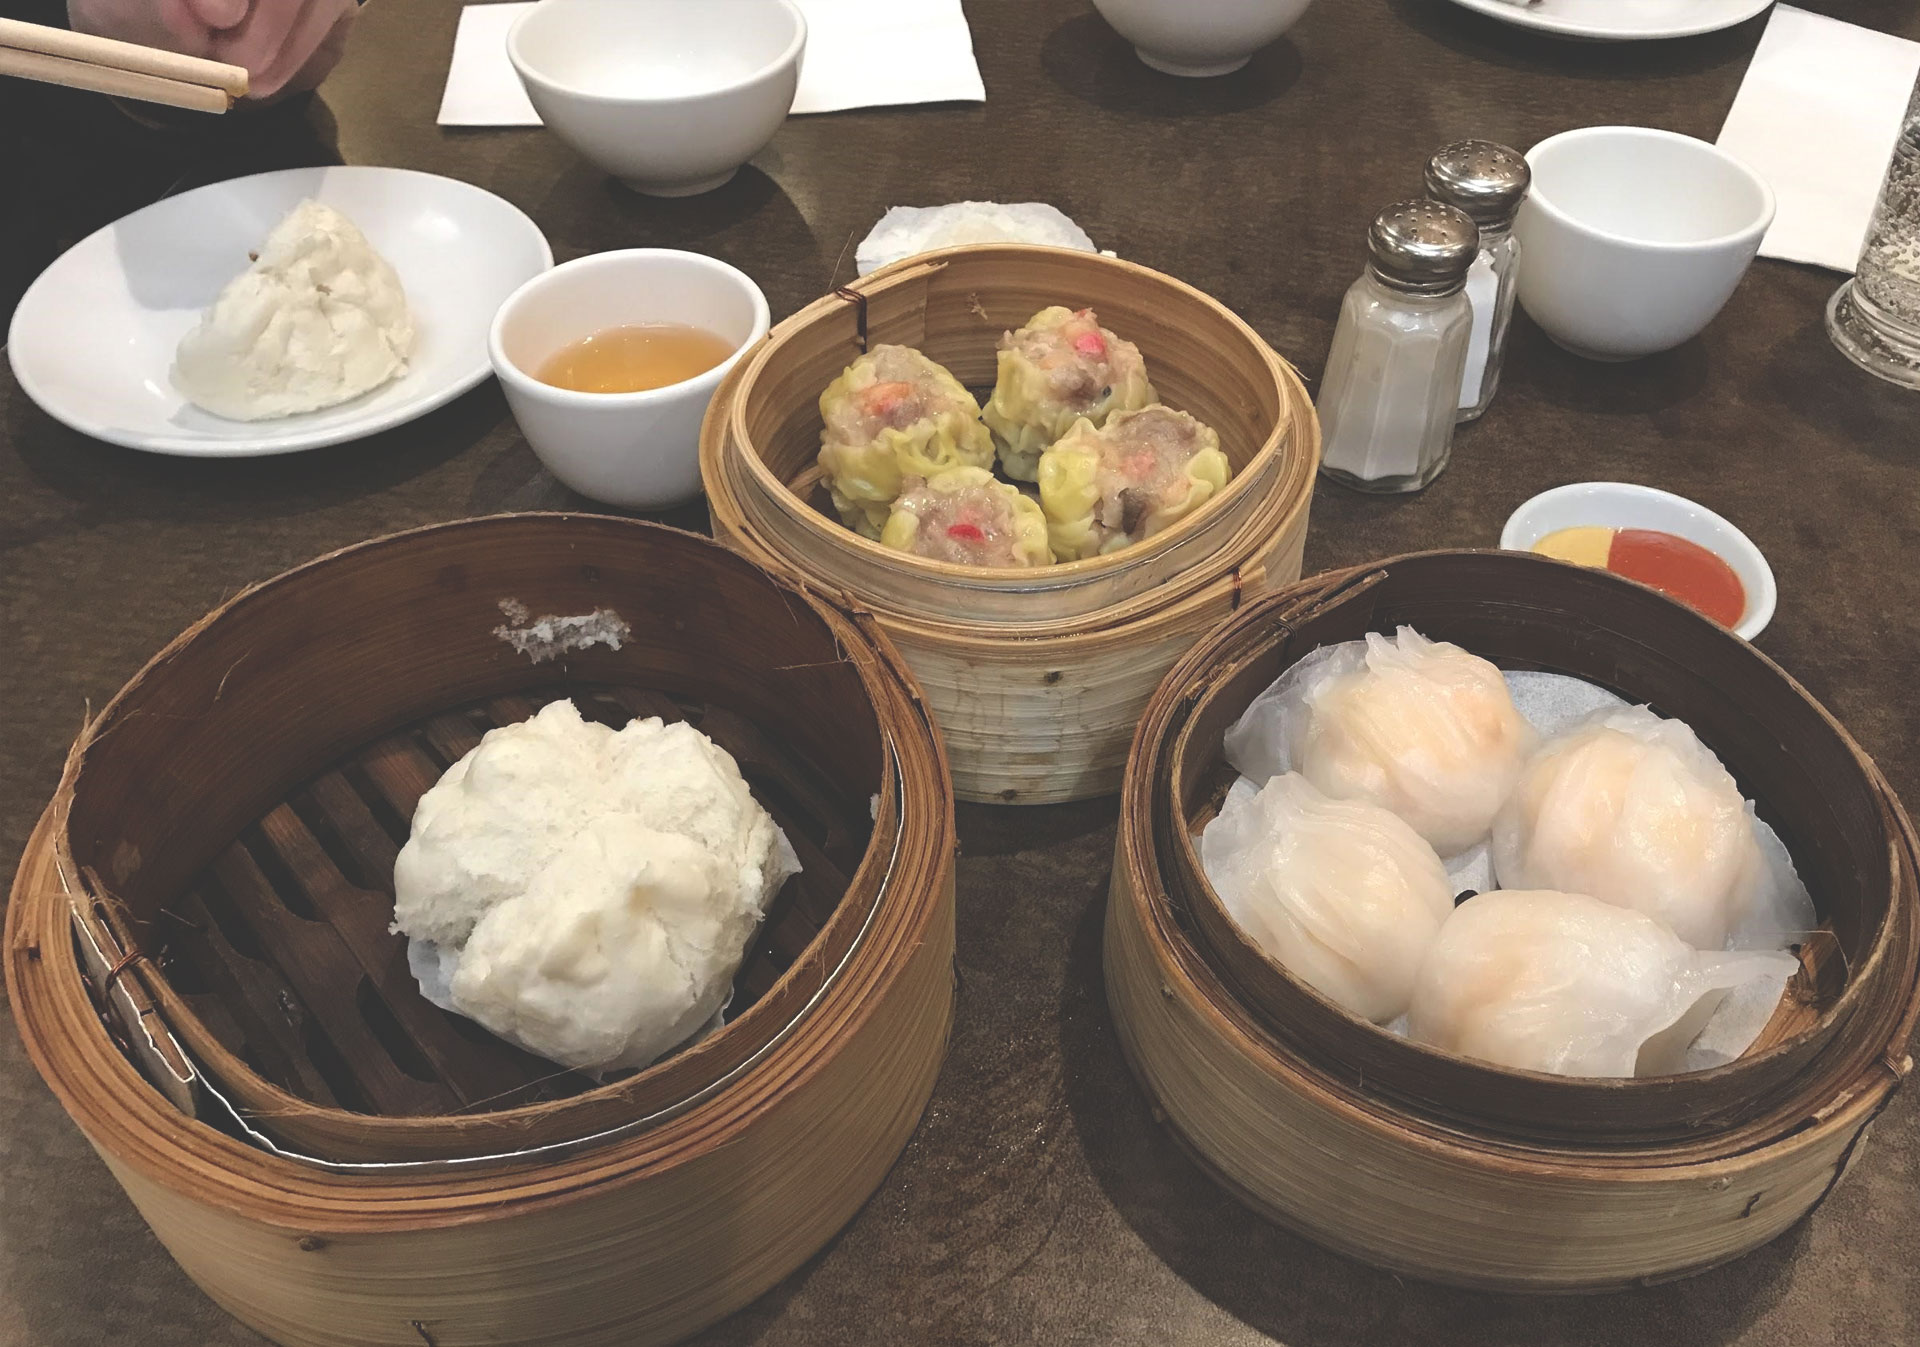 Try something new and exciting at Dim Sum Calgary